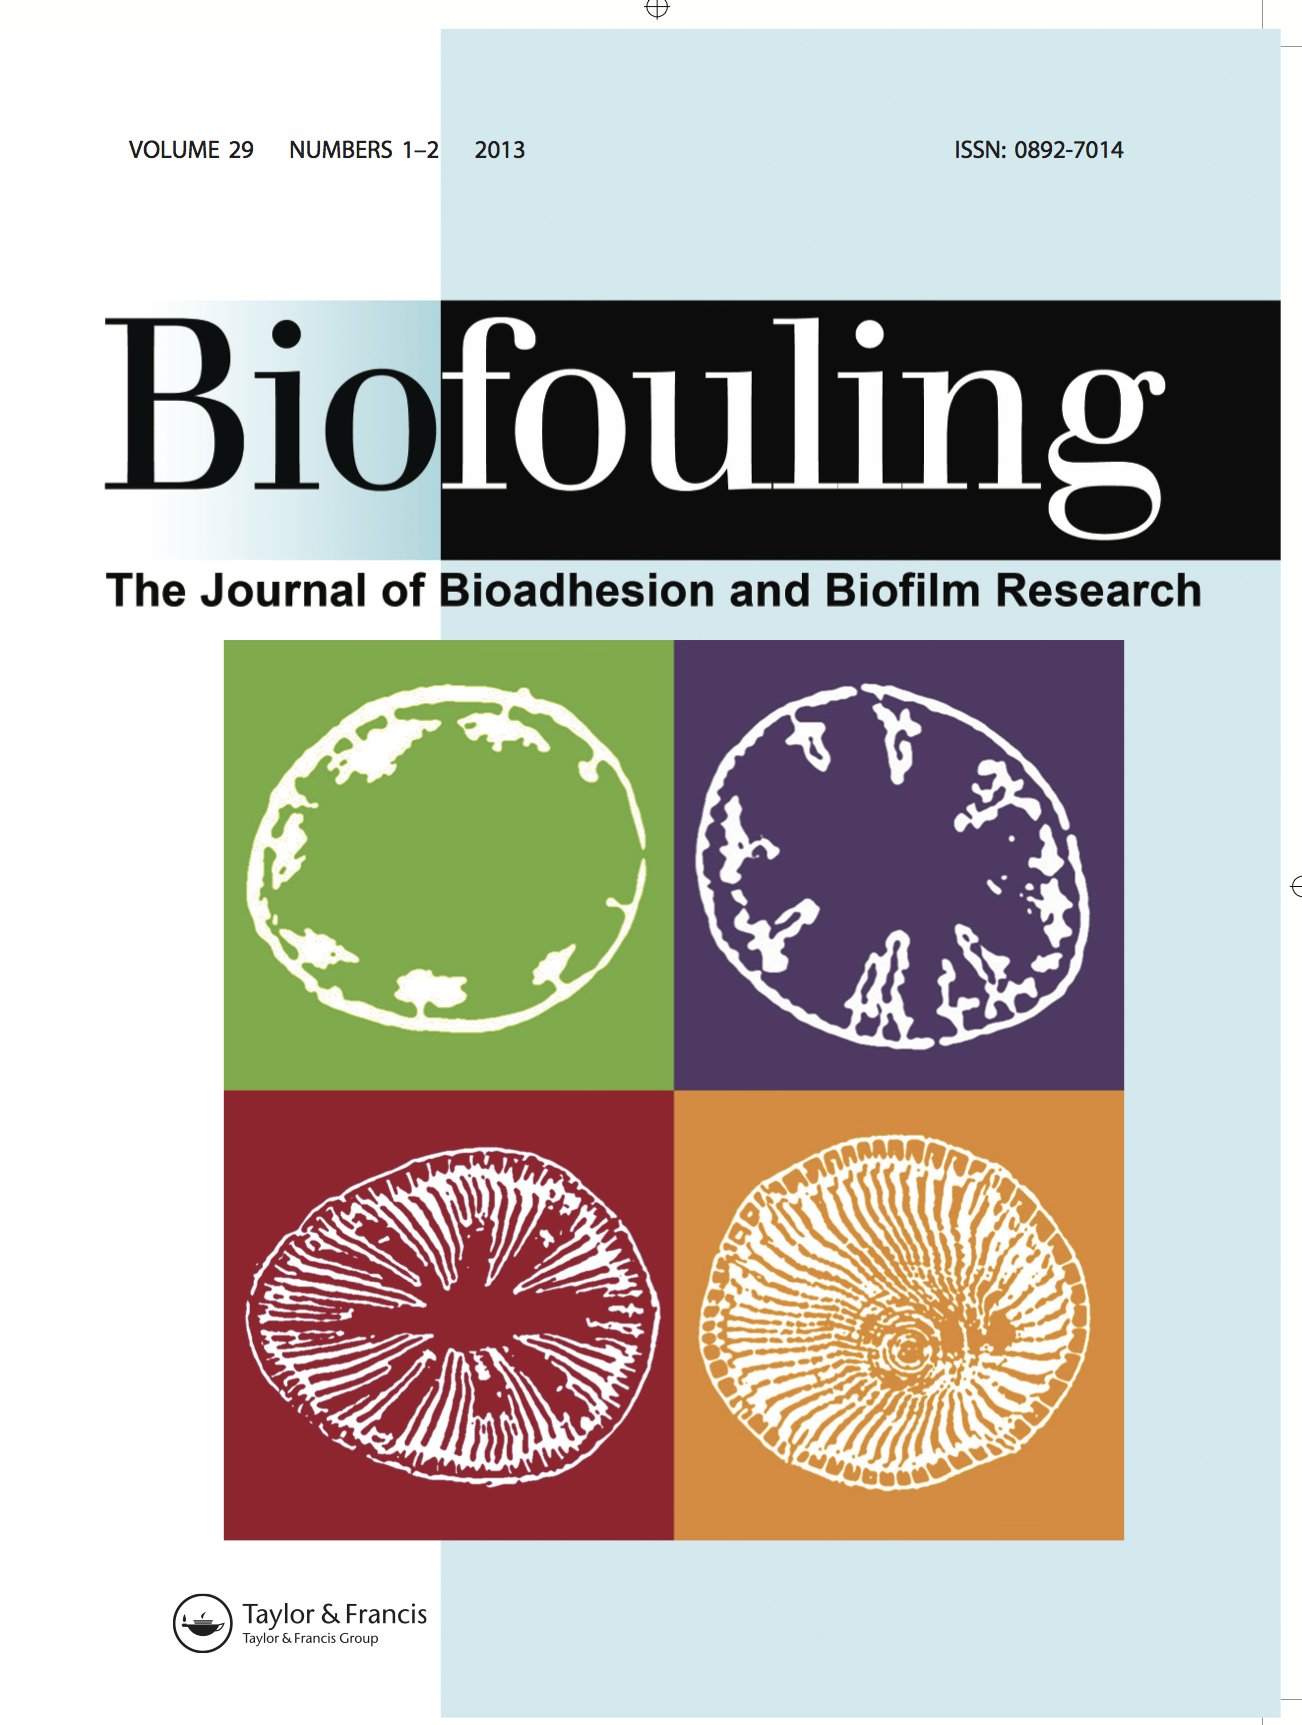 2013 Biofouling Cover_crop